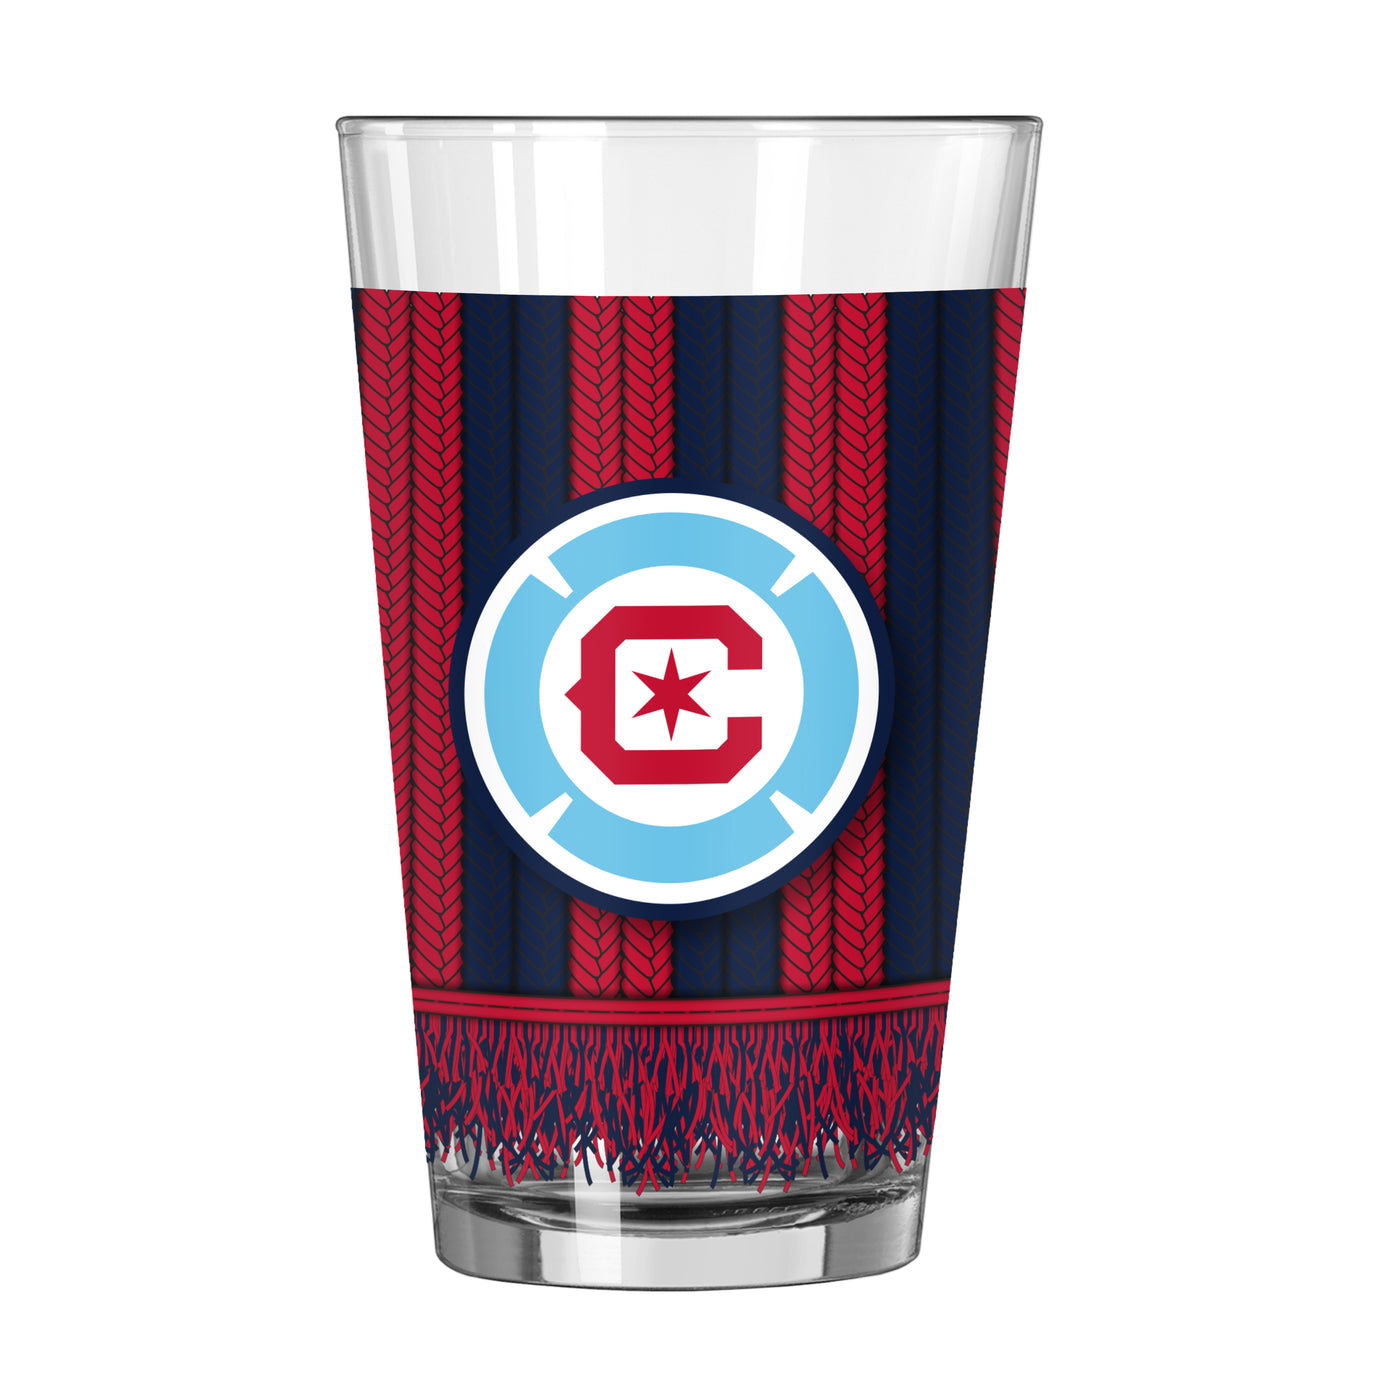 Chicago Fire 16oz Scarf Pint Glass